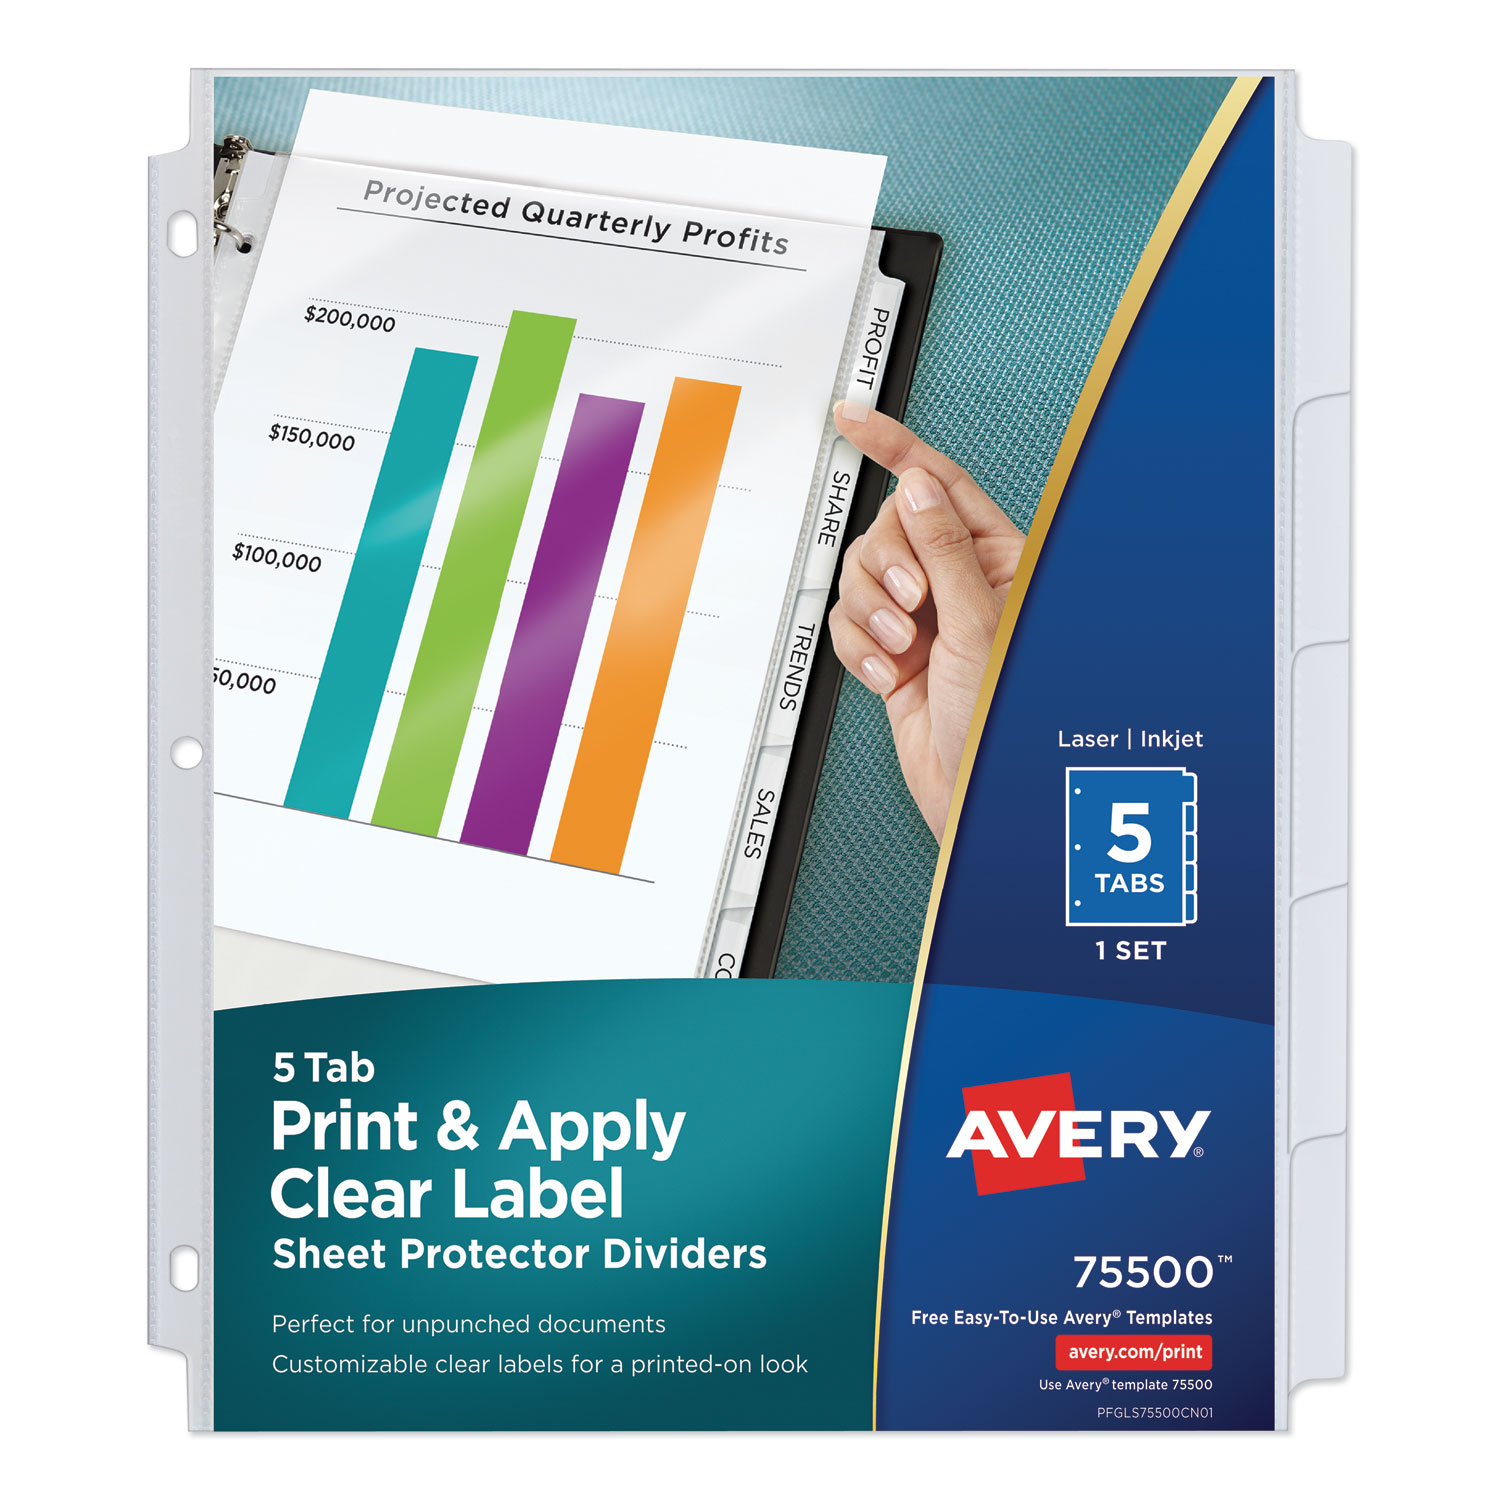  Avery 75500 Print and Apply Index Maker Clear Label Sheet Protector Dividers with White Tabs, 5-Tab, 11 x 8.5, White, 1 Set (AVE75500) 